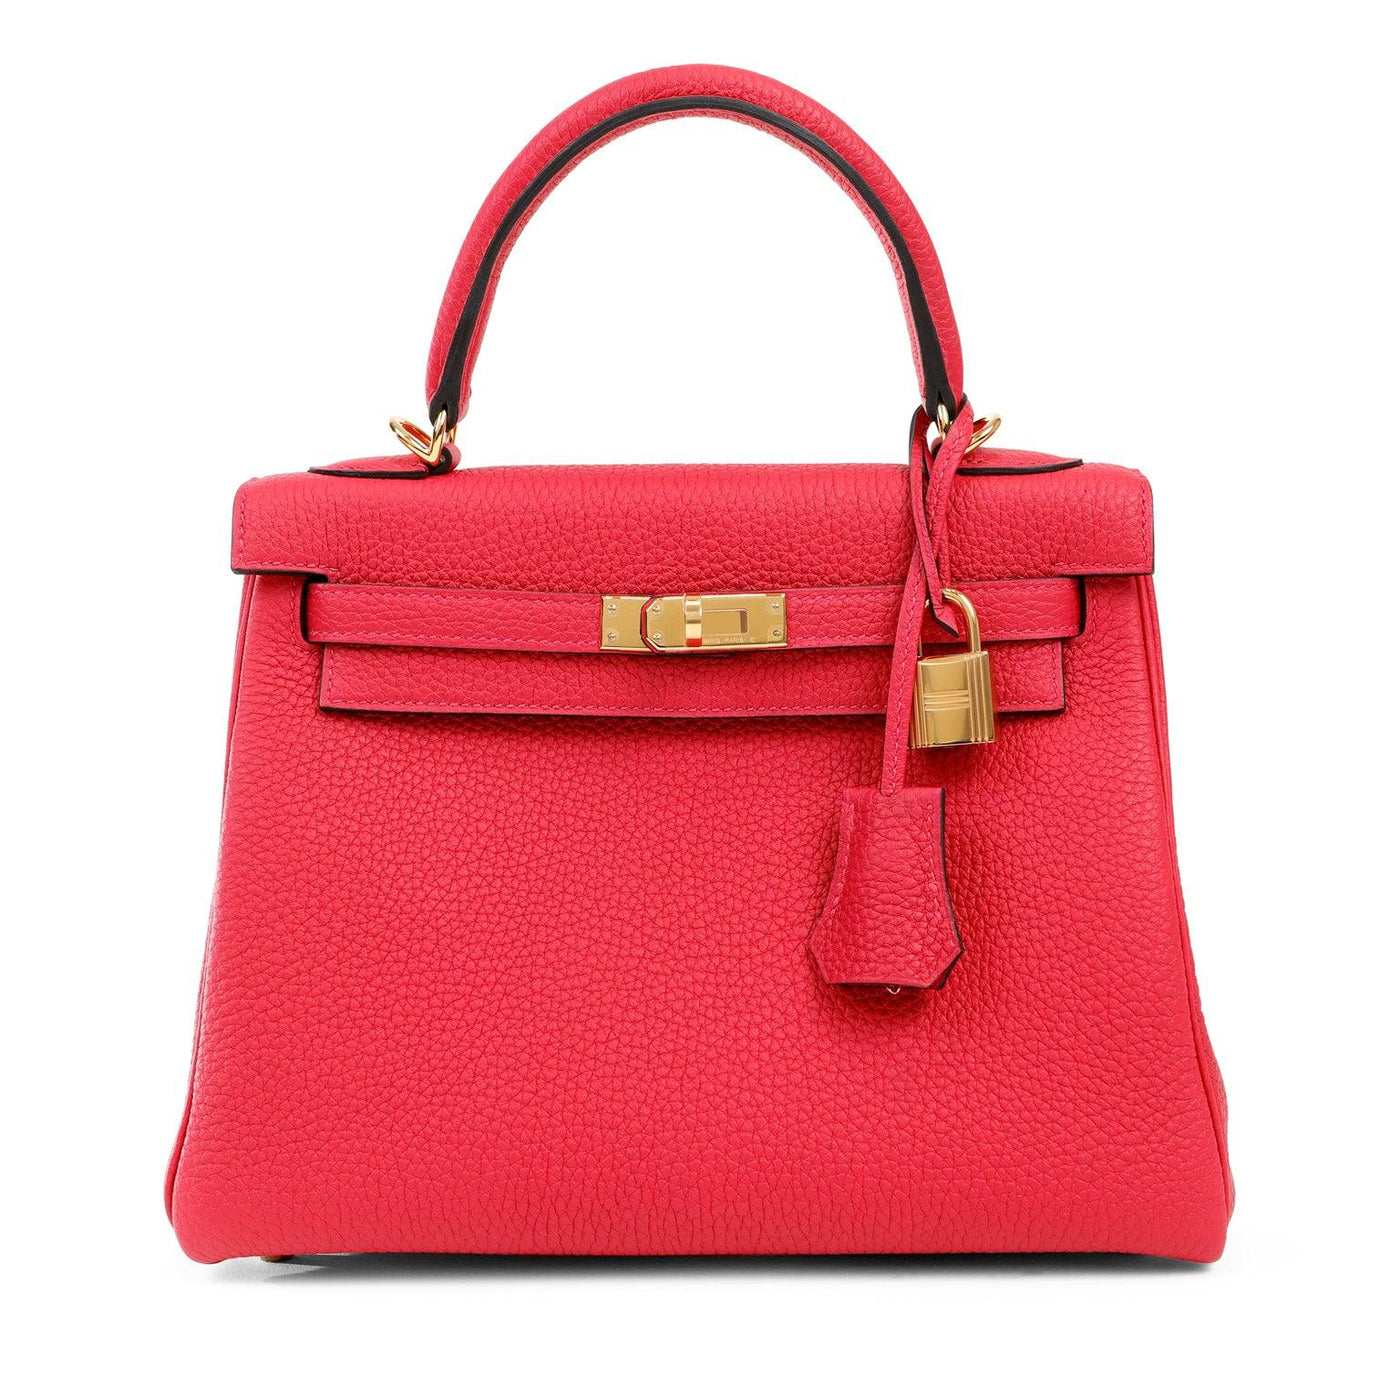 Hermès 25cm Framboise Togo Kelly with Gold Hardware - Only Authentics